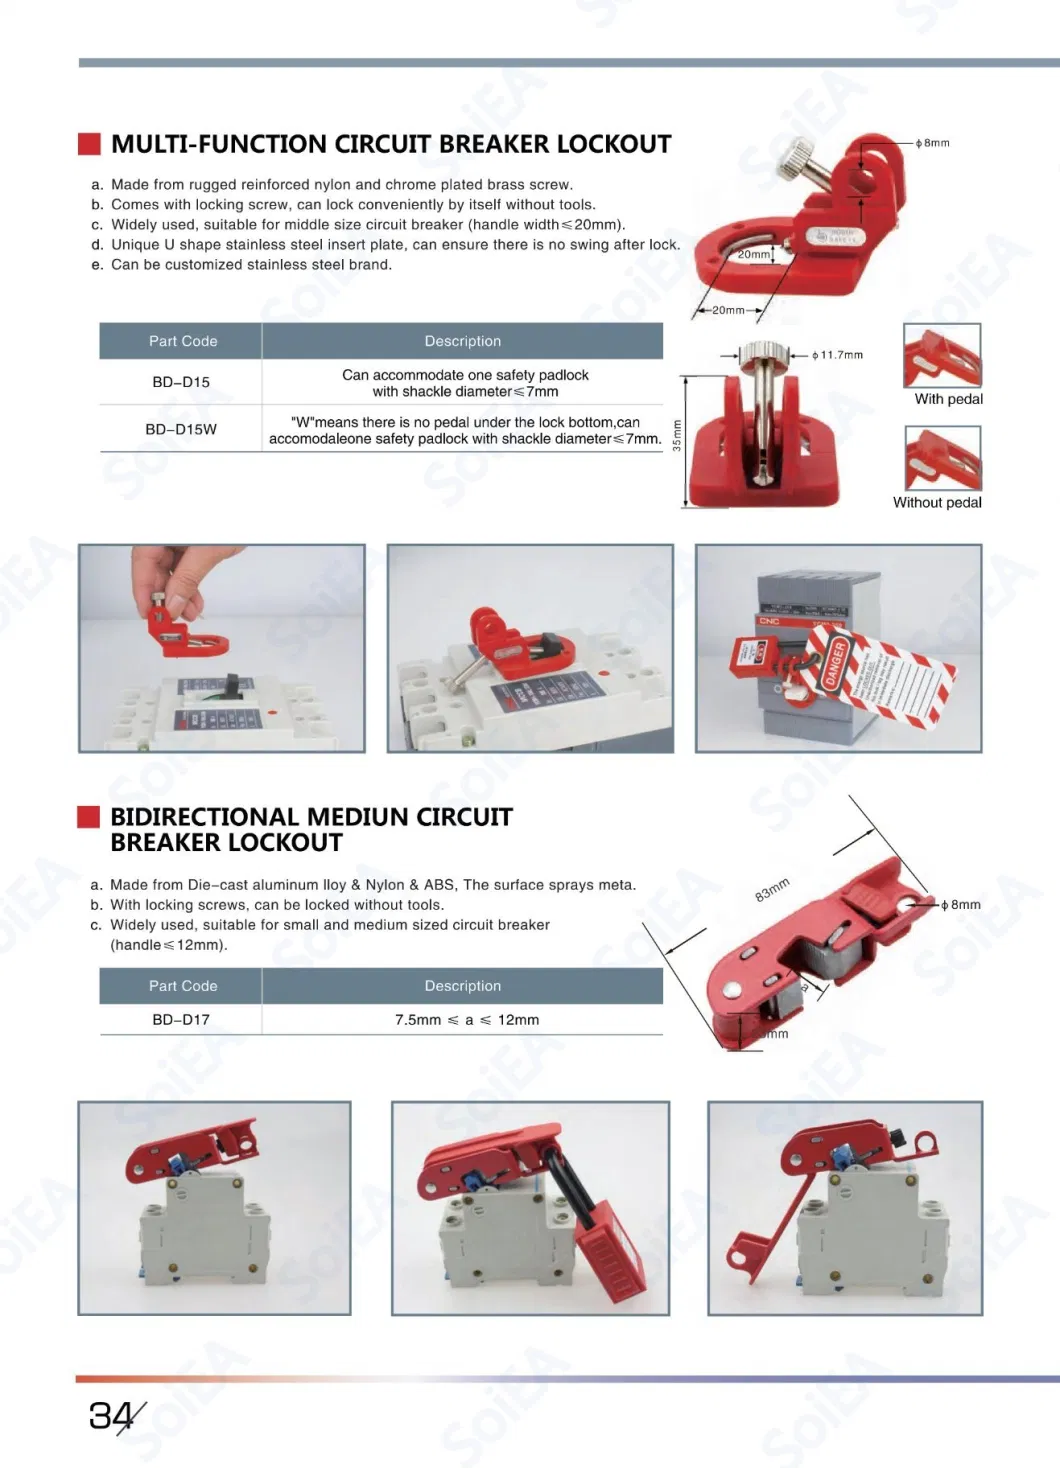 OEM Multi-Function Circuit Breaker Lockout Device Use with Lockout Tagout Padlock